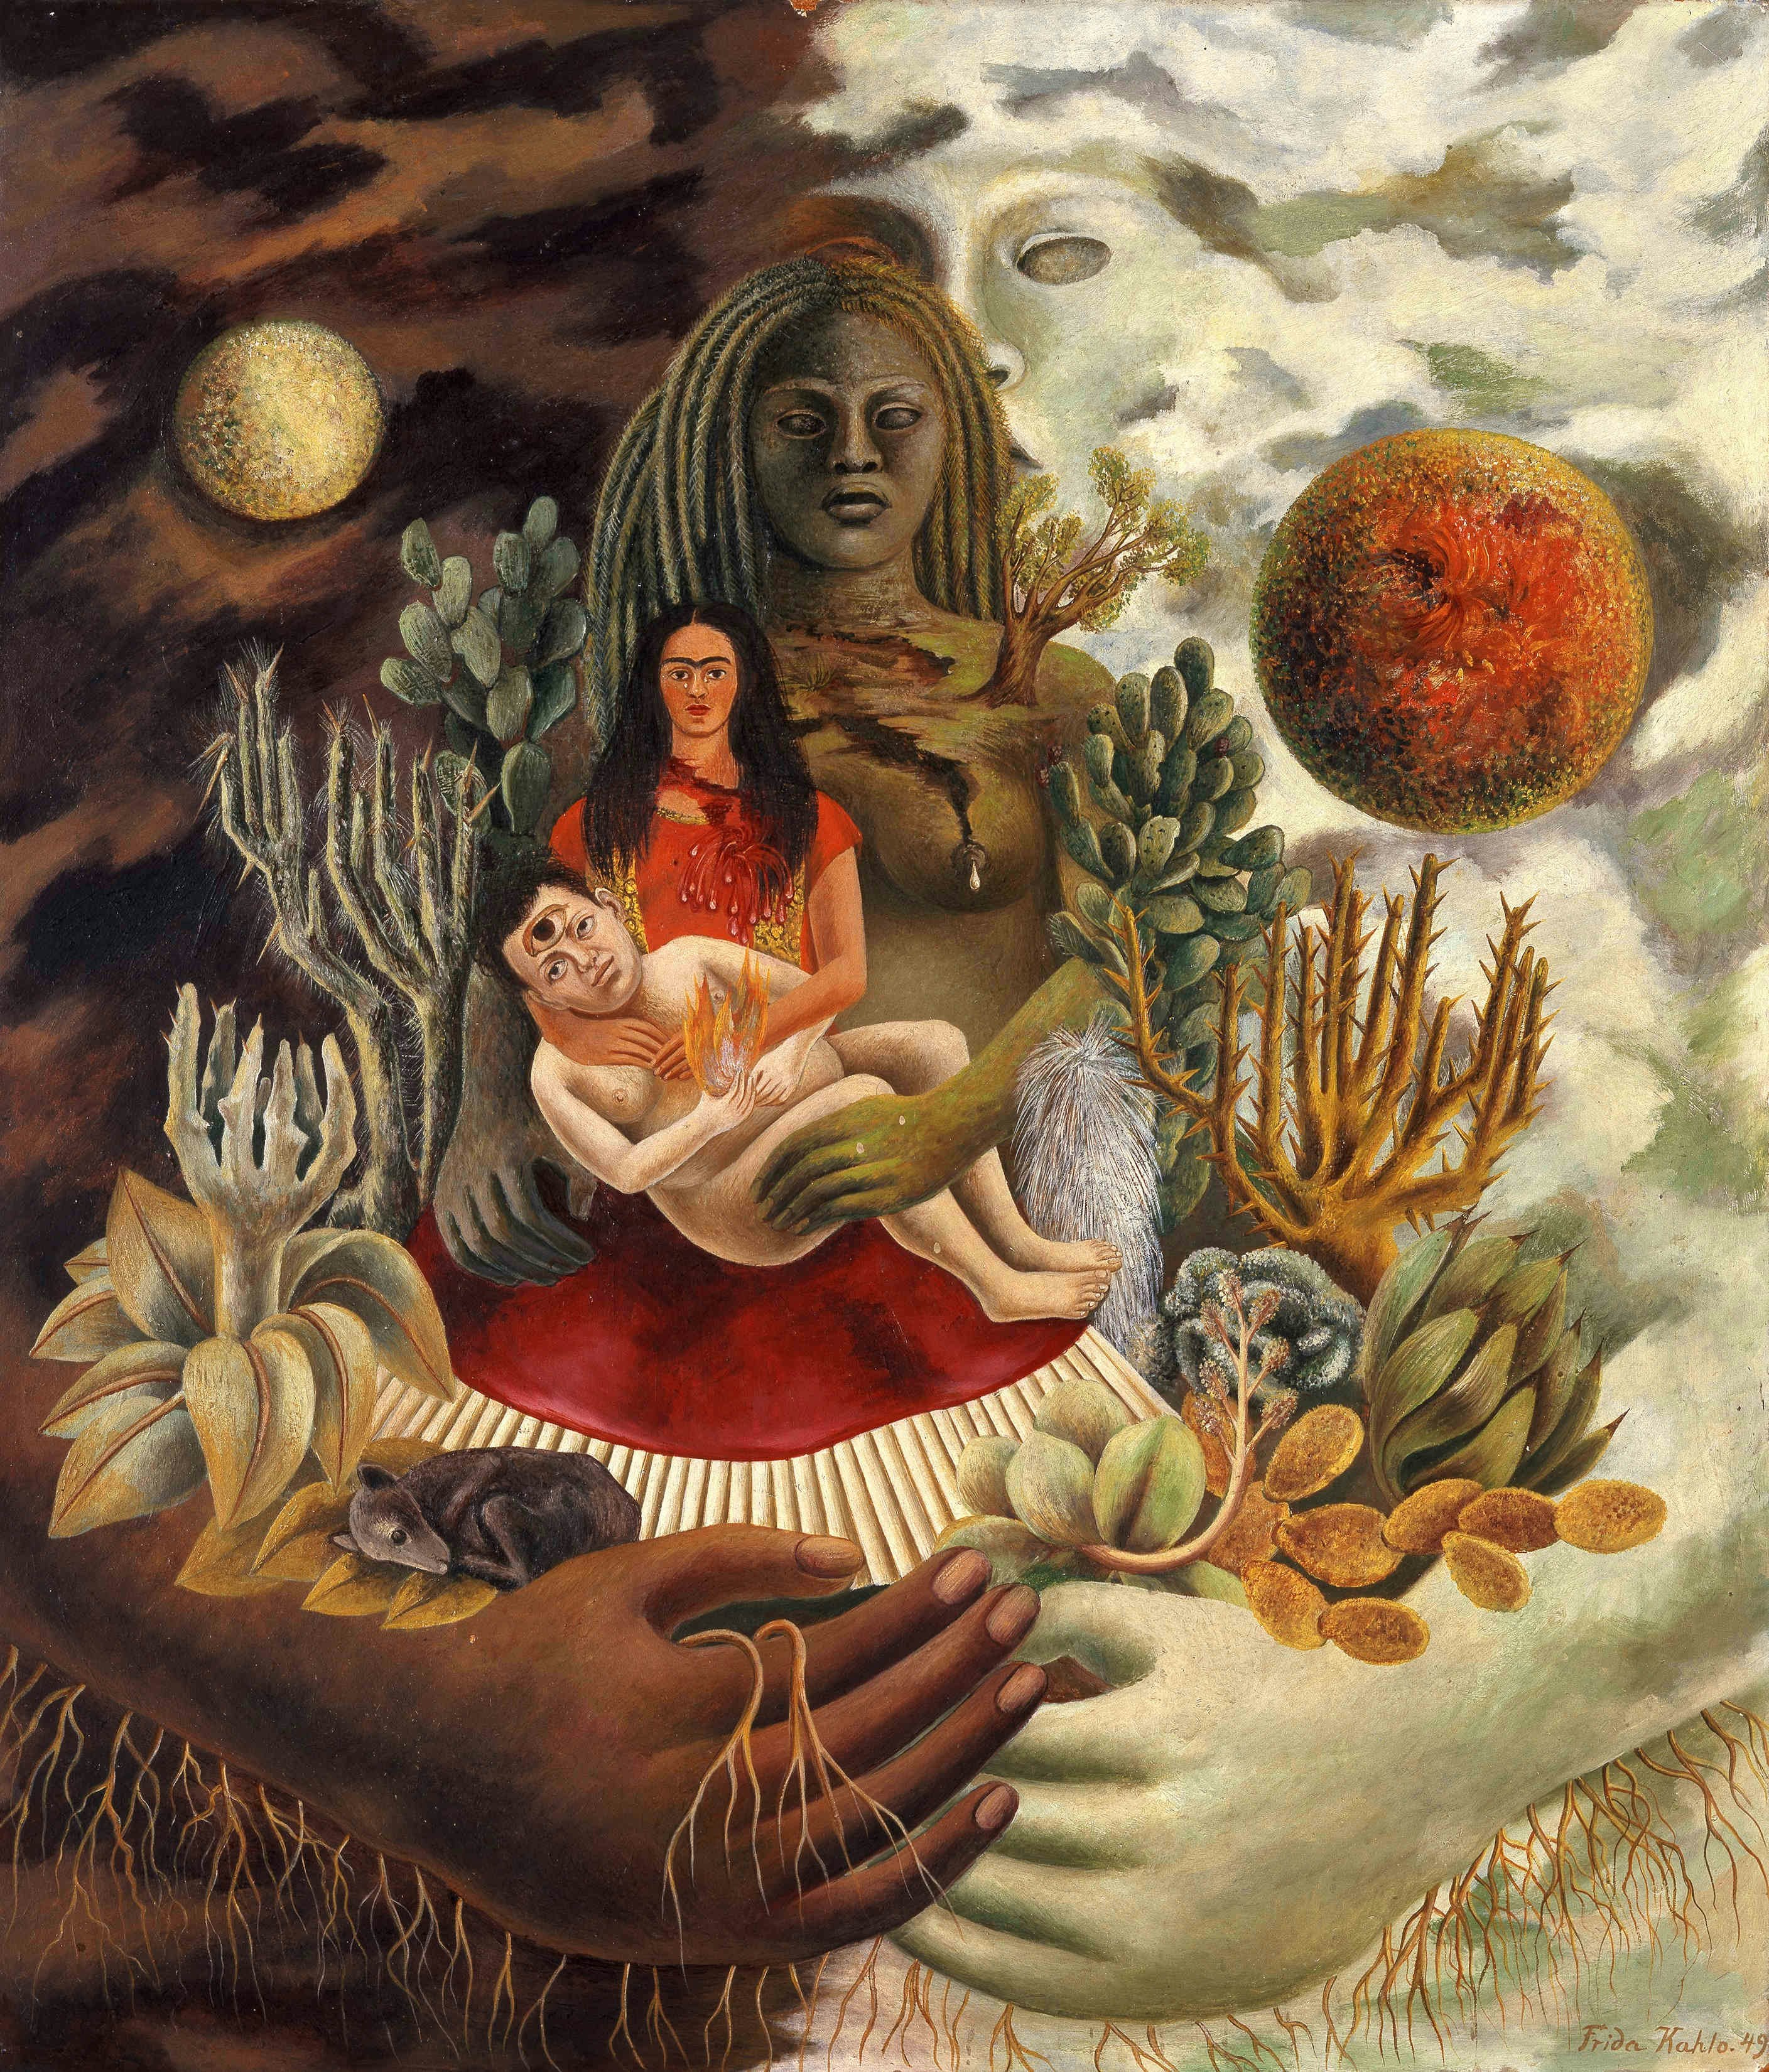 Travel News - The Love Embrace of the Universe, the Earth (Mexico), Me, Diego, and Señor Xolotl, Frida Kahlo, 1949 (c) The Jacques and Natasha Gelman Collection of 20th Century Mexican Art and The Vergel Collection